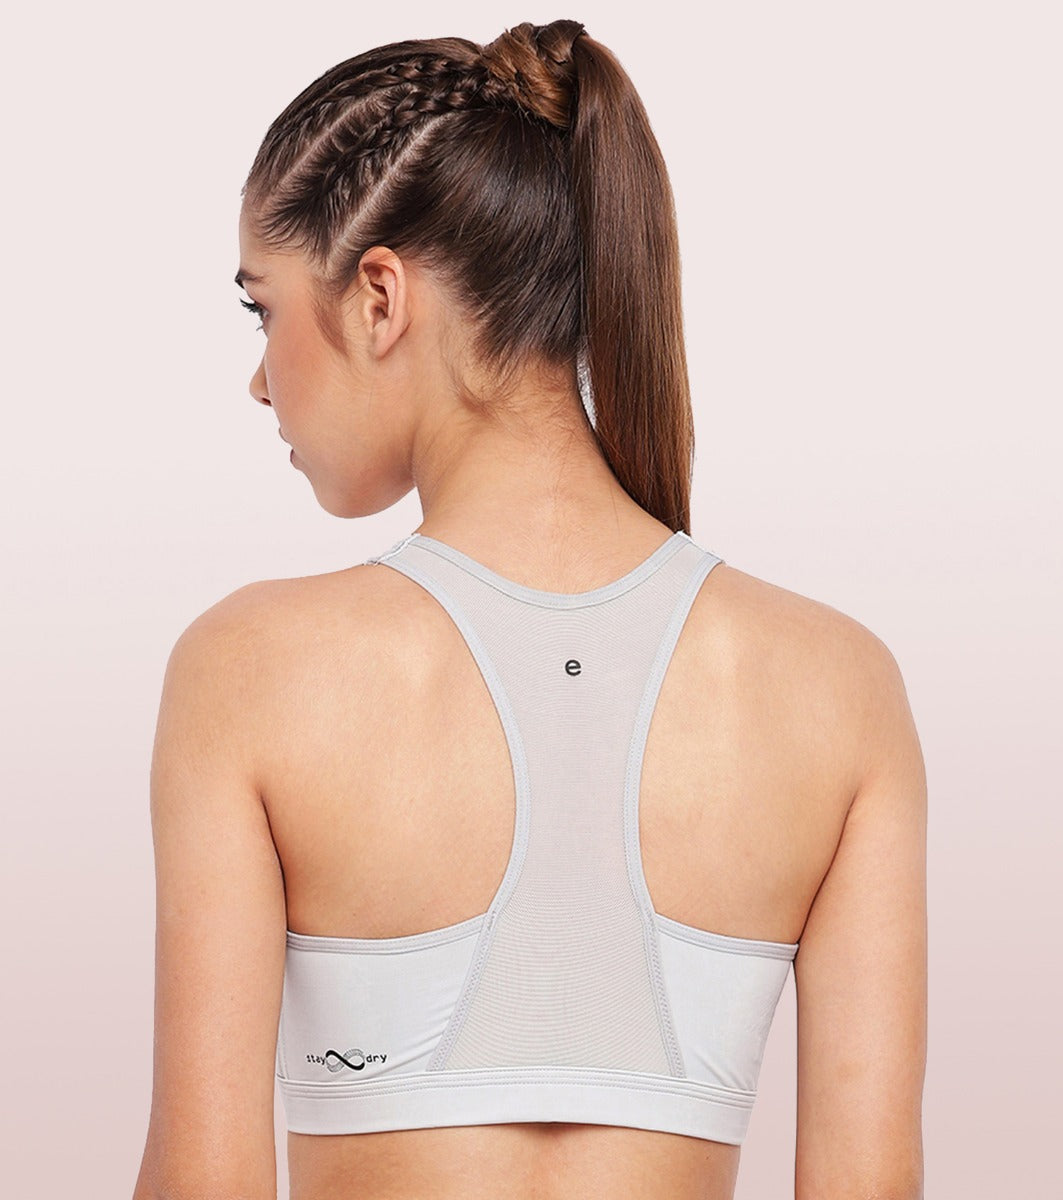 Enamor SB11 High Impact Sports Bra Padded Wirefree Front Zipper Grey 32D in  Jaipur - Dealers, Manufacturers & Suppliers - Justdial